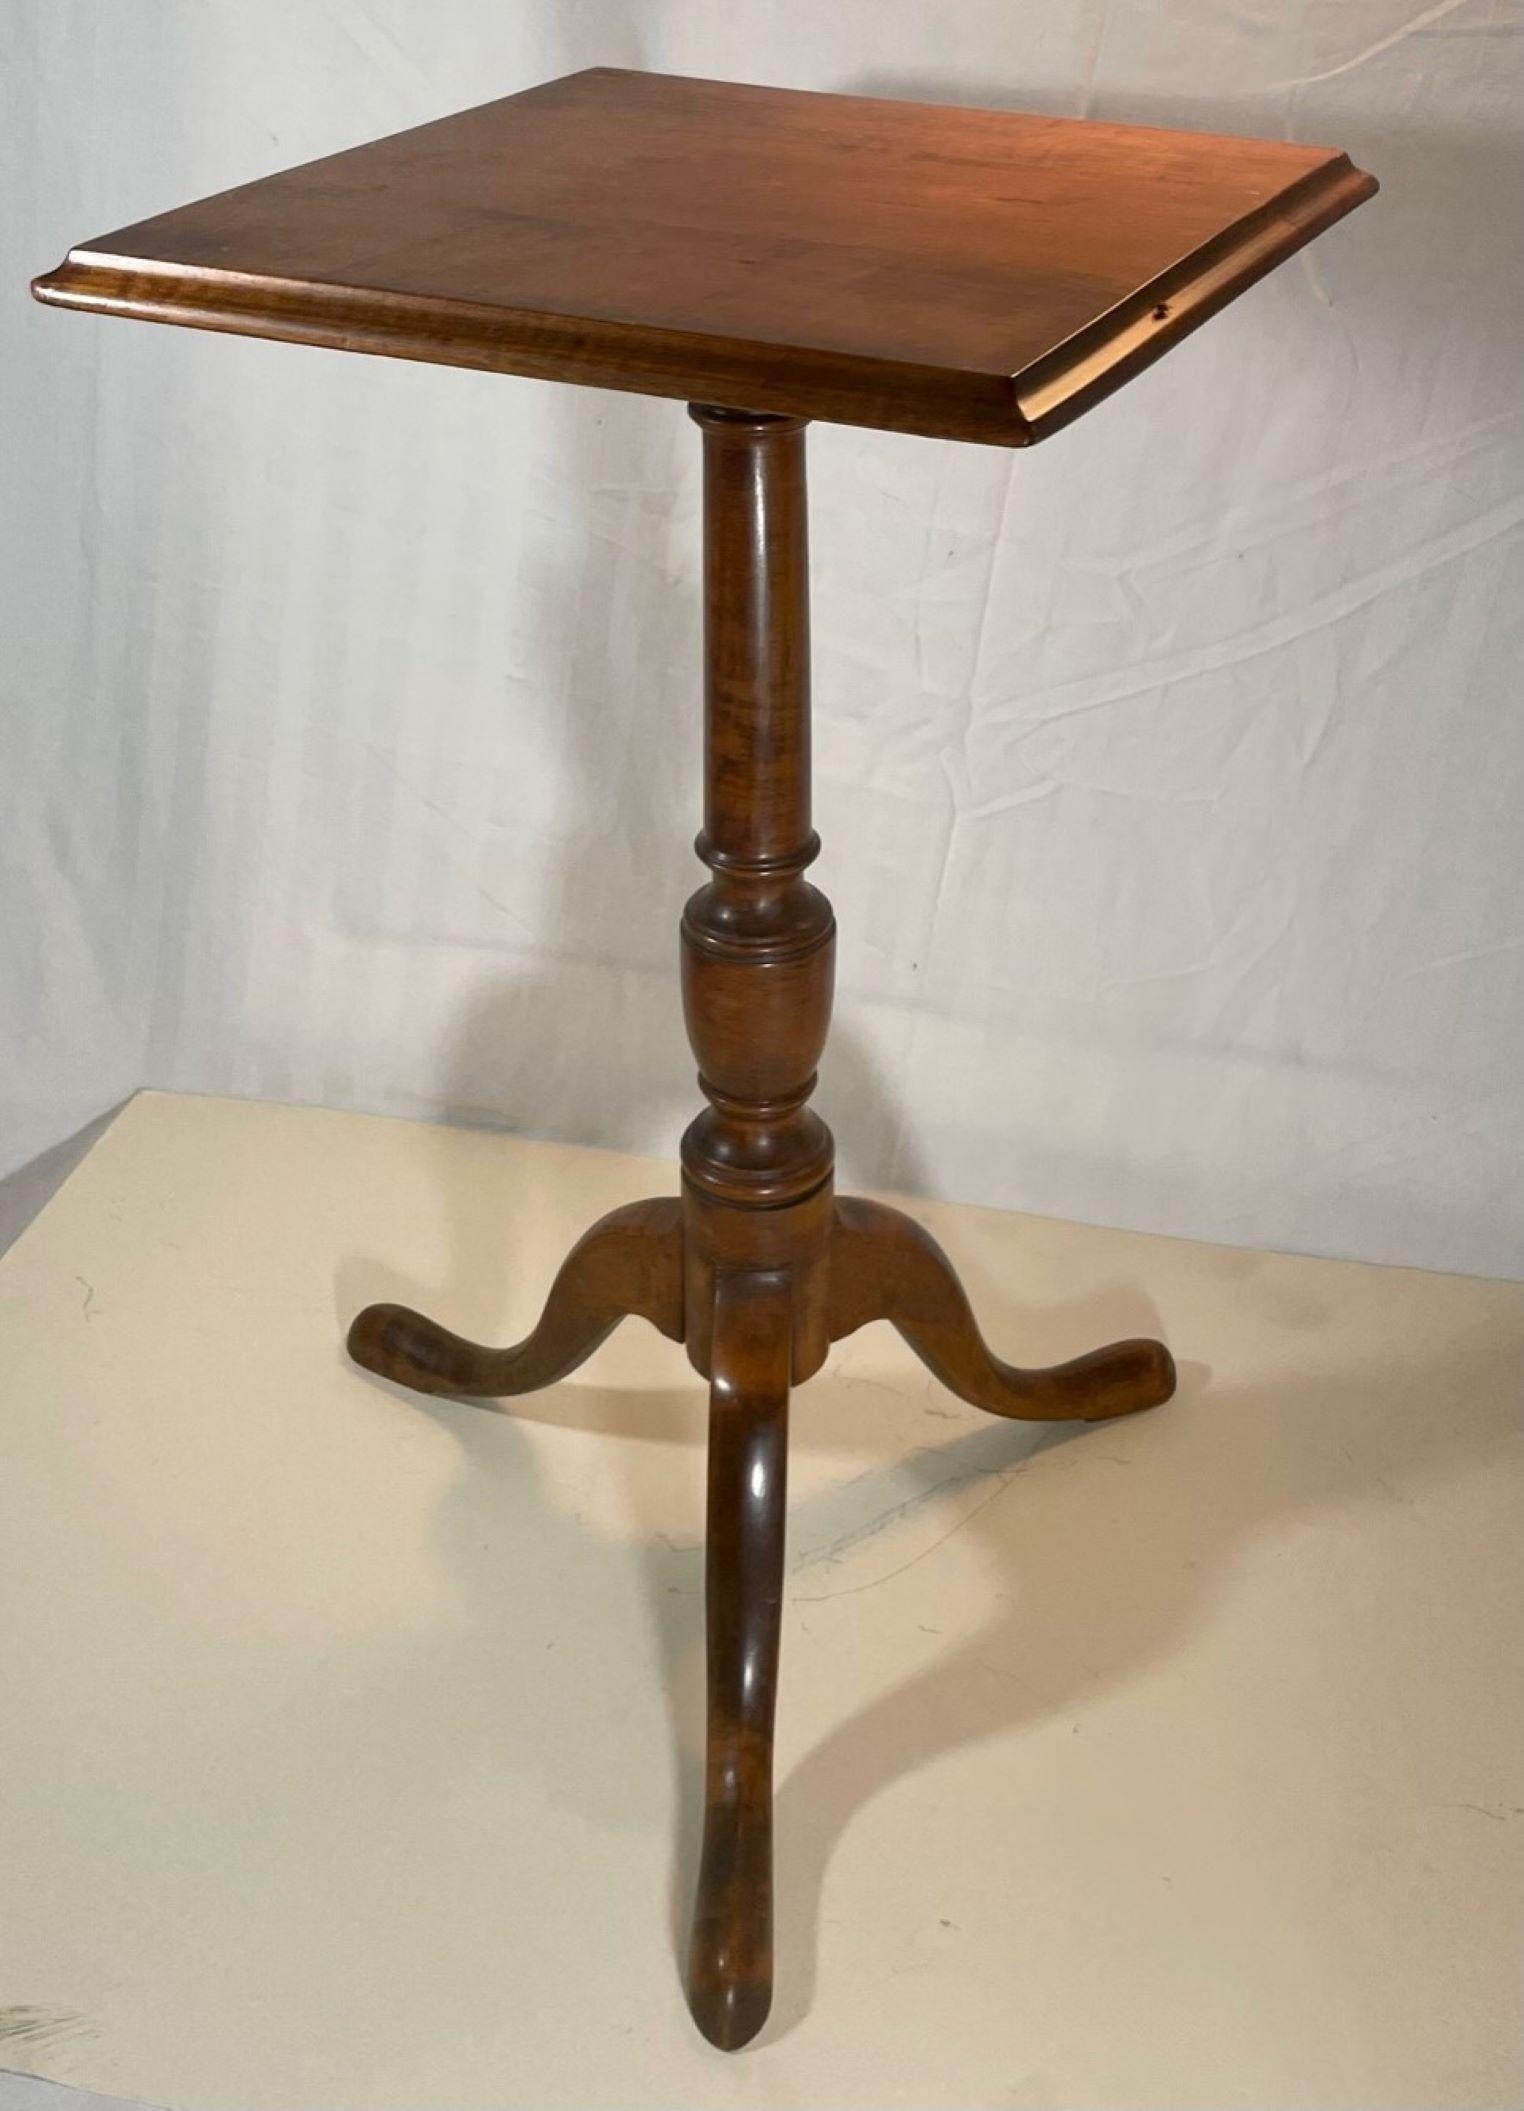 Early 19th Century Queen Anne New England tiger maple candlestand.

Antique 19th century Queen Anne square tiger maple candlestand. The ogee edged square tray top is raised on a well-proportioned turned pedestal, ending in tripod legs with snake